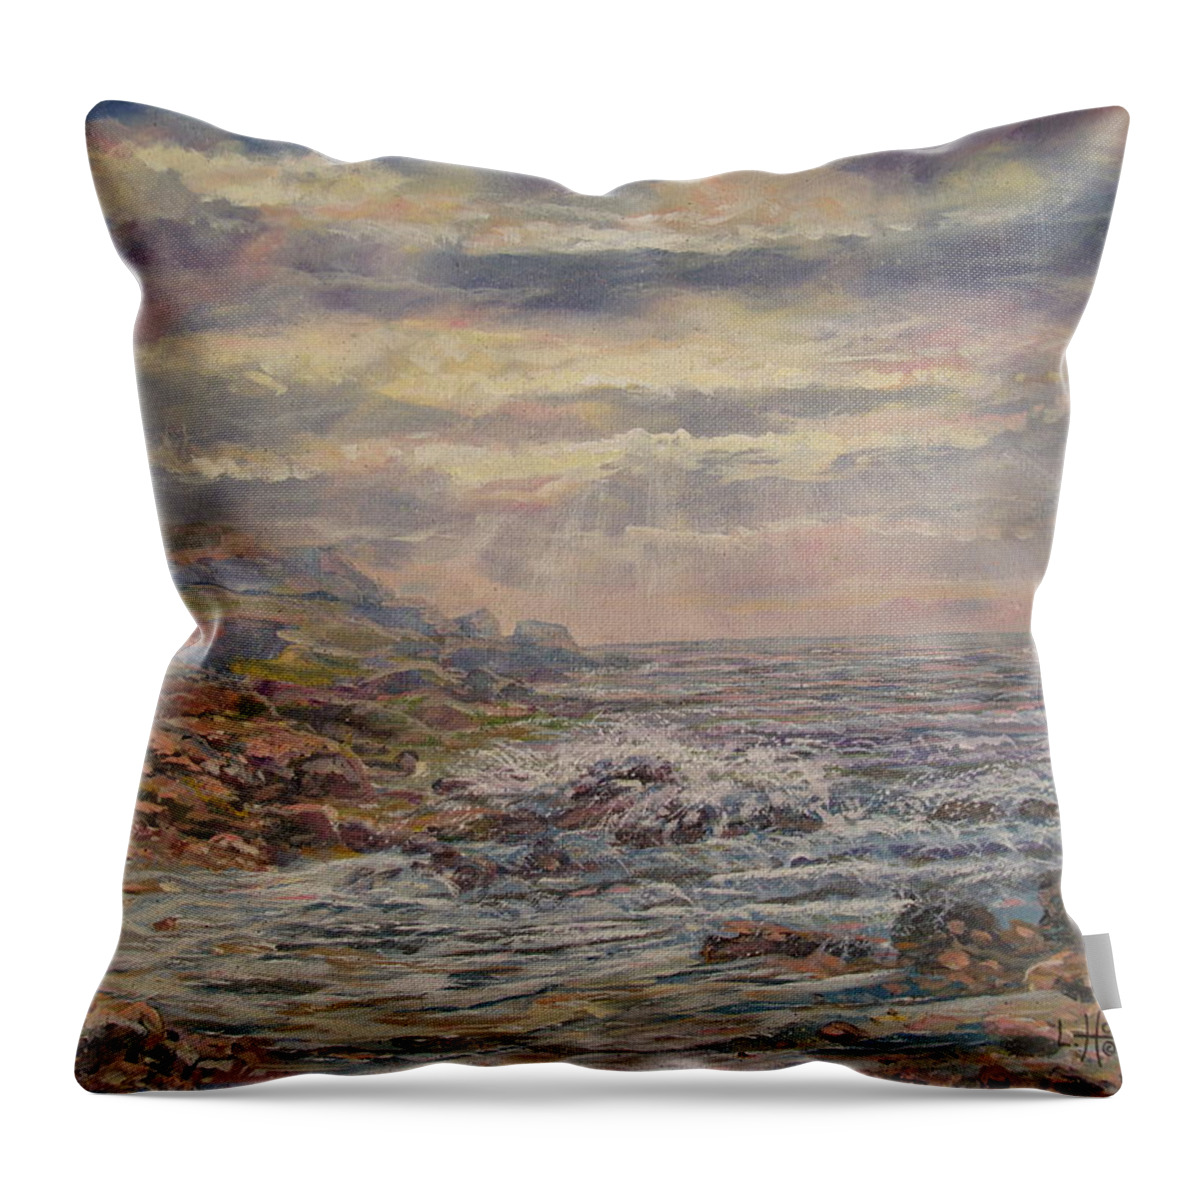 Landscape Throw Pillow featuring the painting Seascape With Clouds. by Leonard Holland